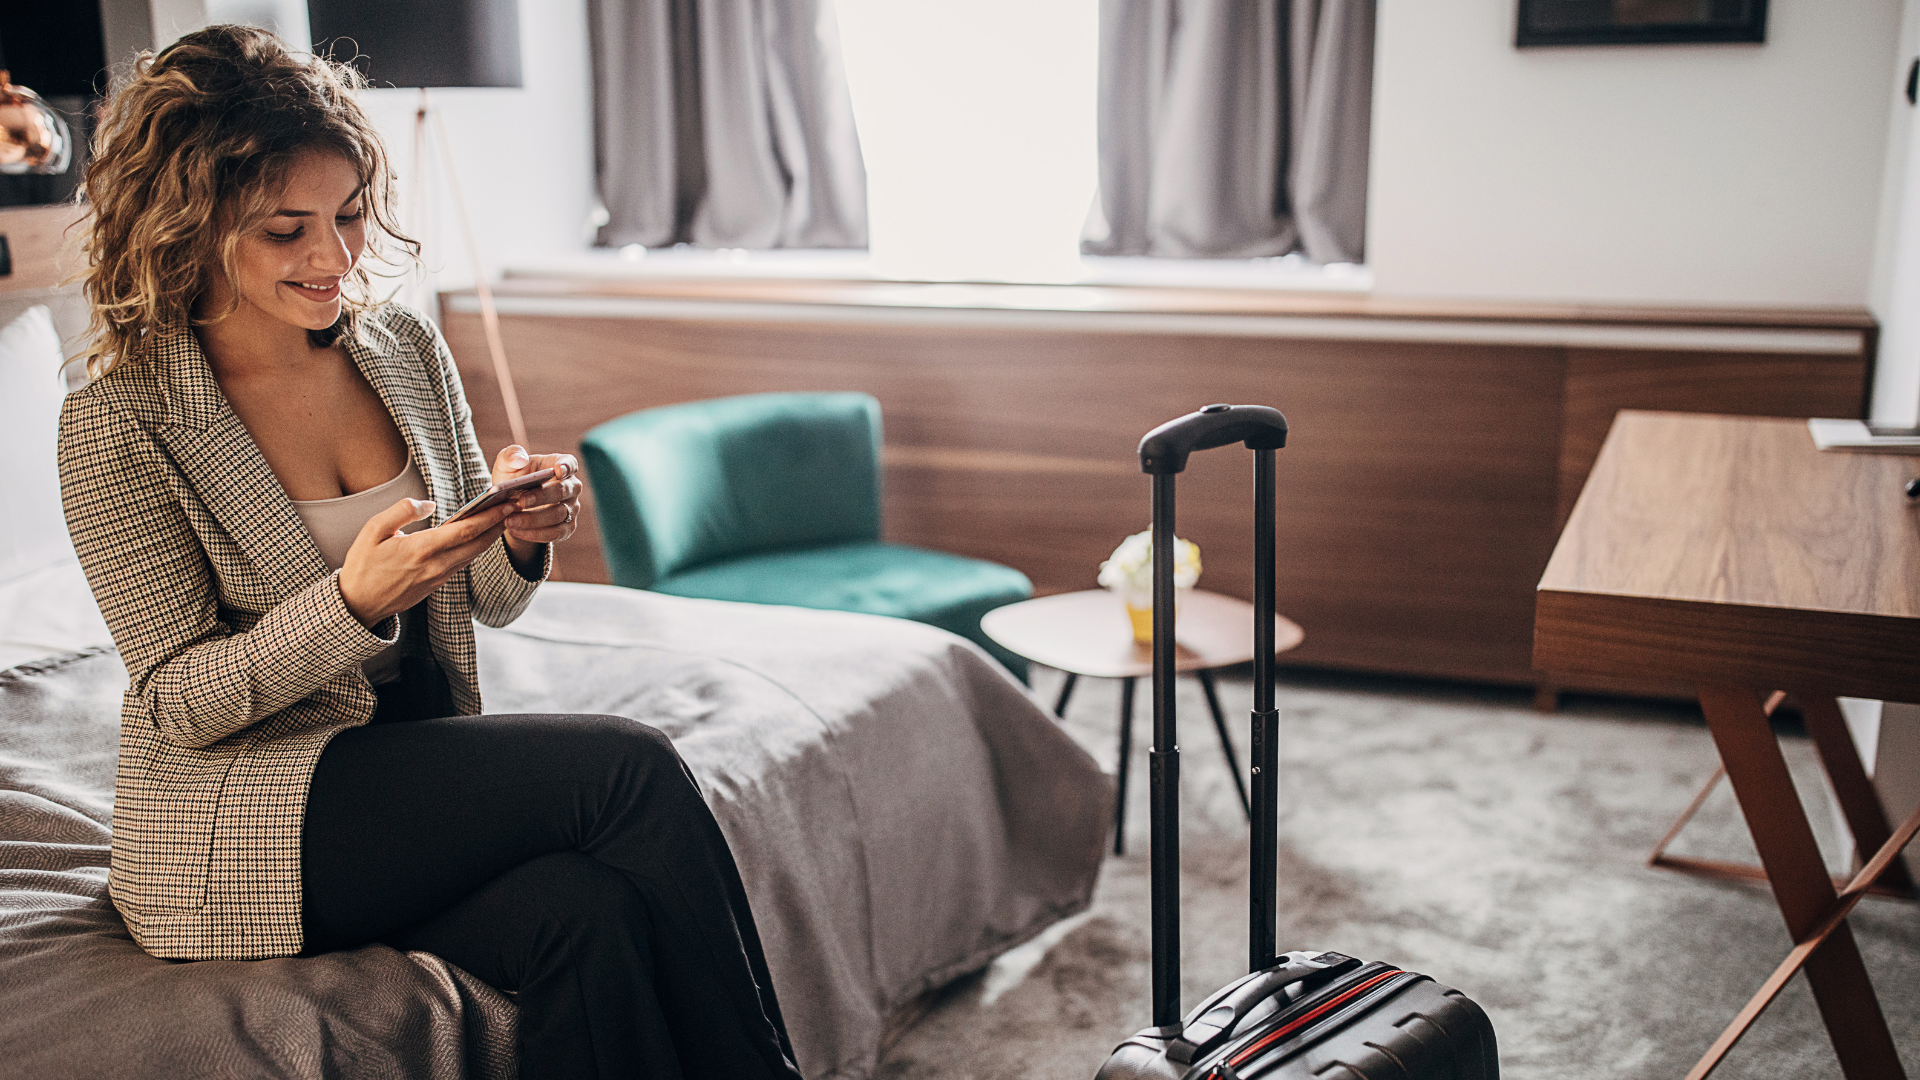 12 Smart Technologies Redefining the Hotel Room Experience